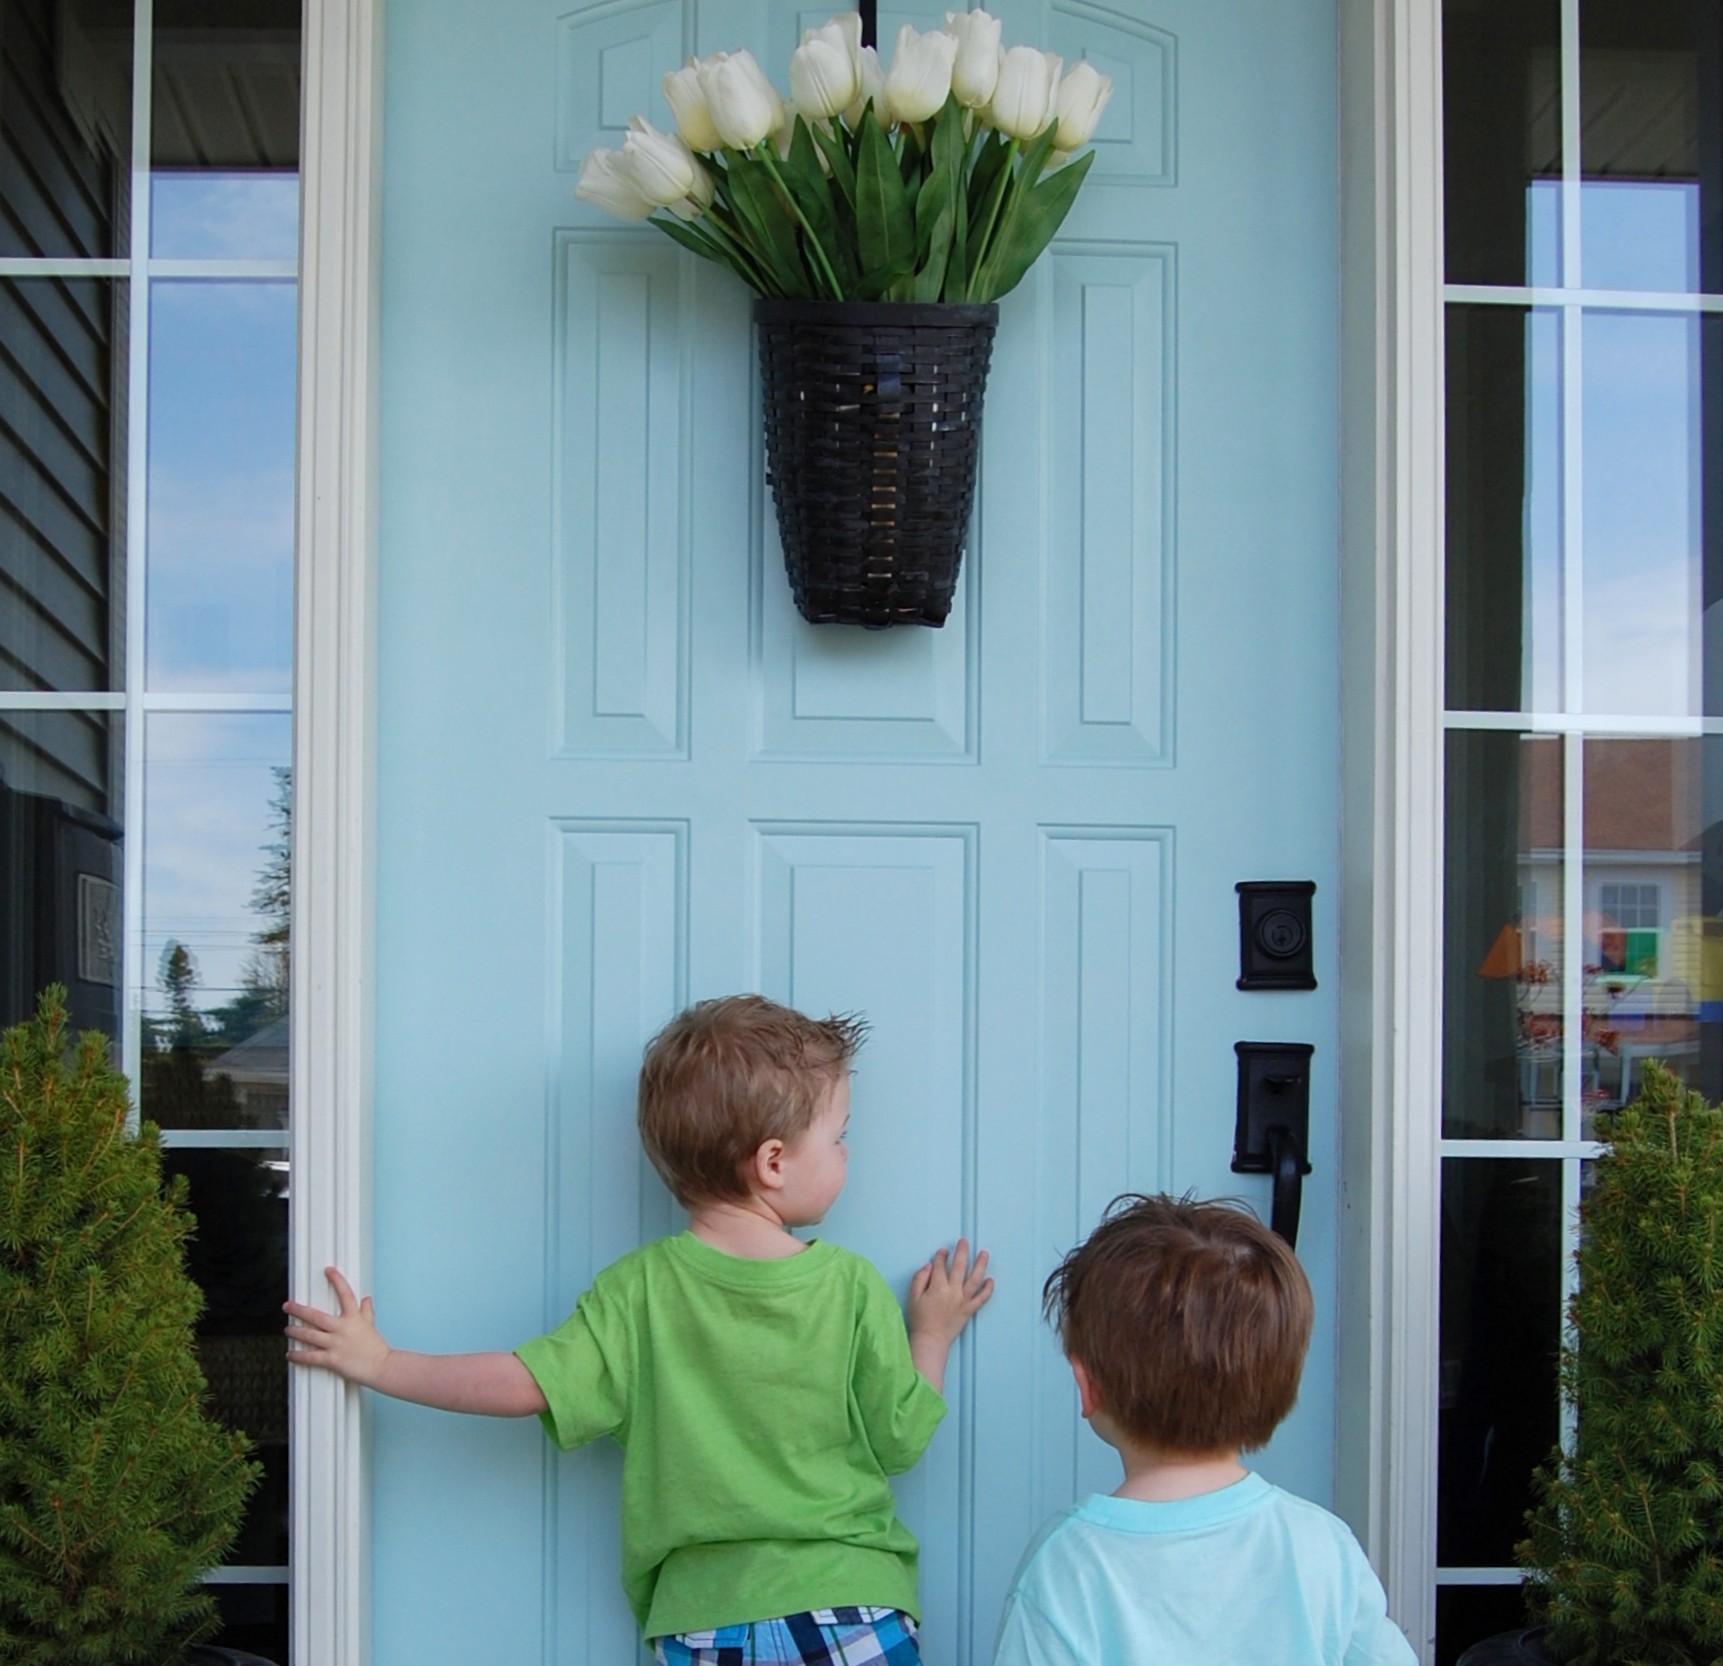 How to paint a door in under an hour {The Harried Mom’s Guide to Paint a Front Door!}